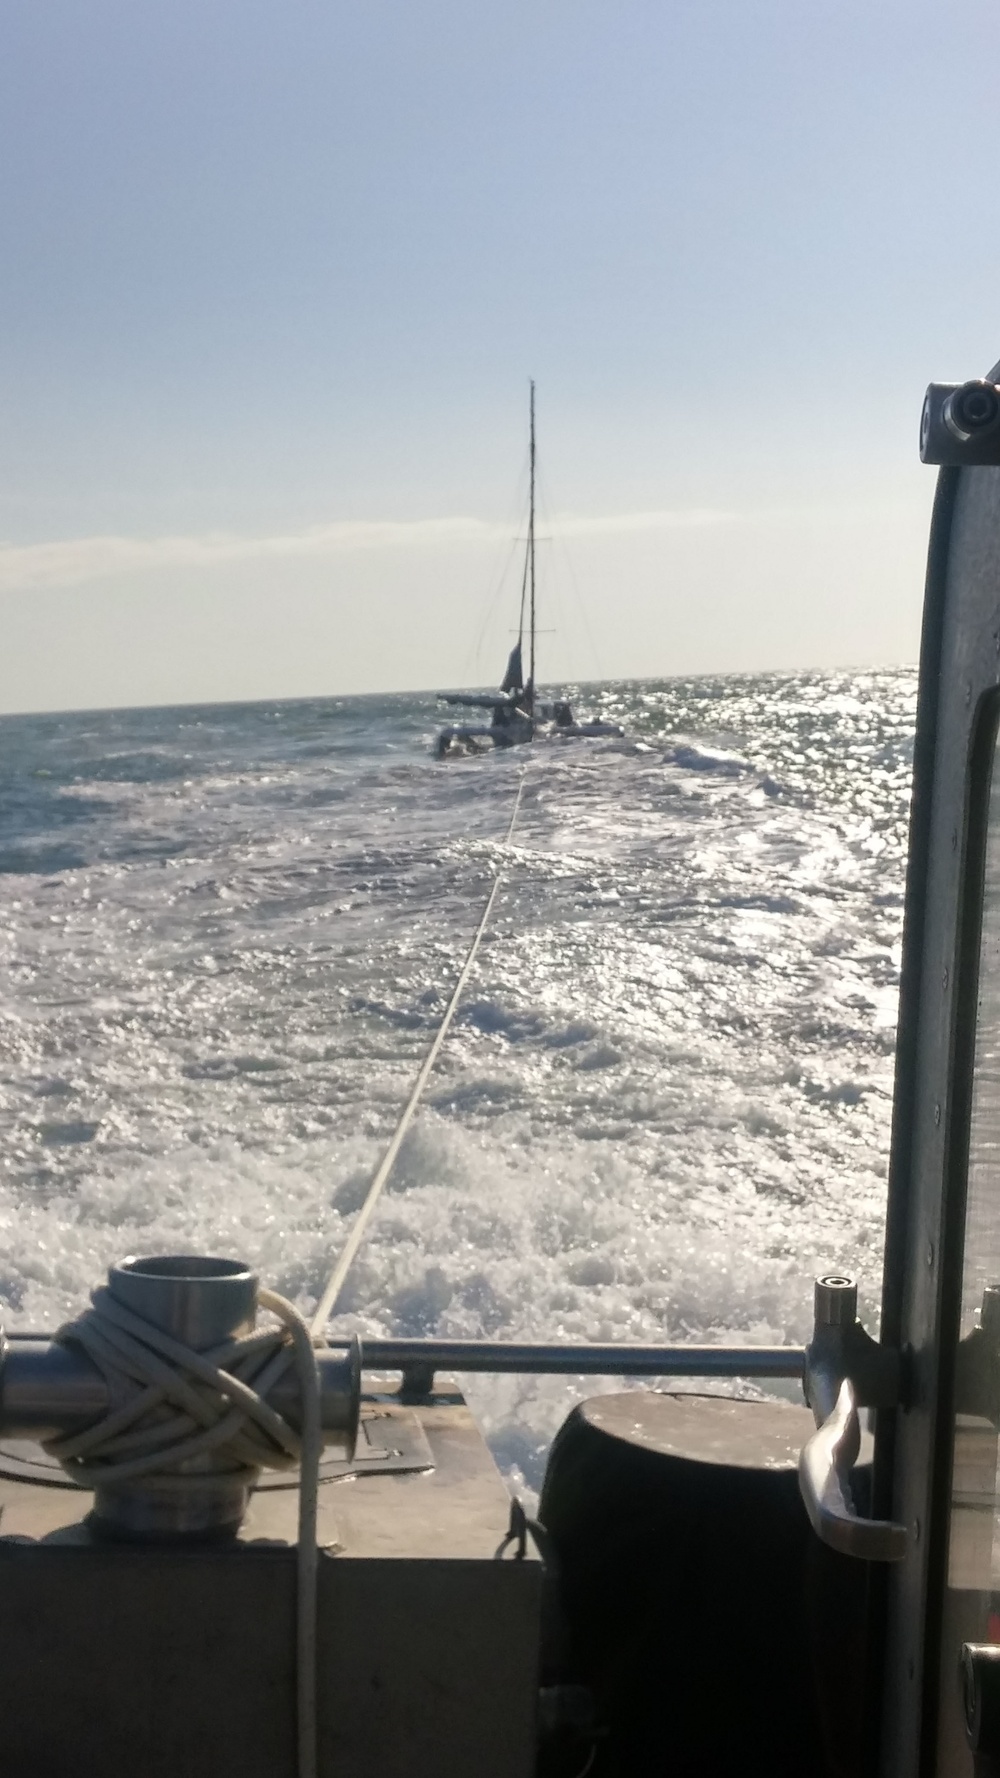 Man on yacht stranded in Gulf of Mexico, towed ashore